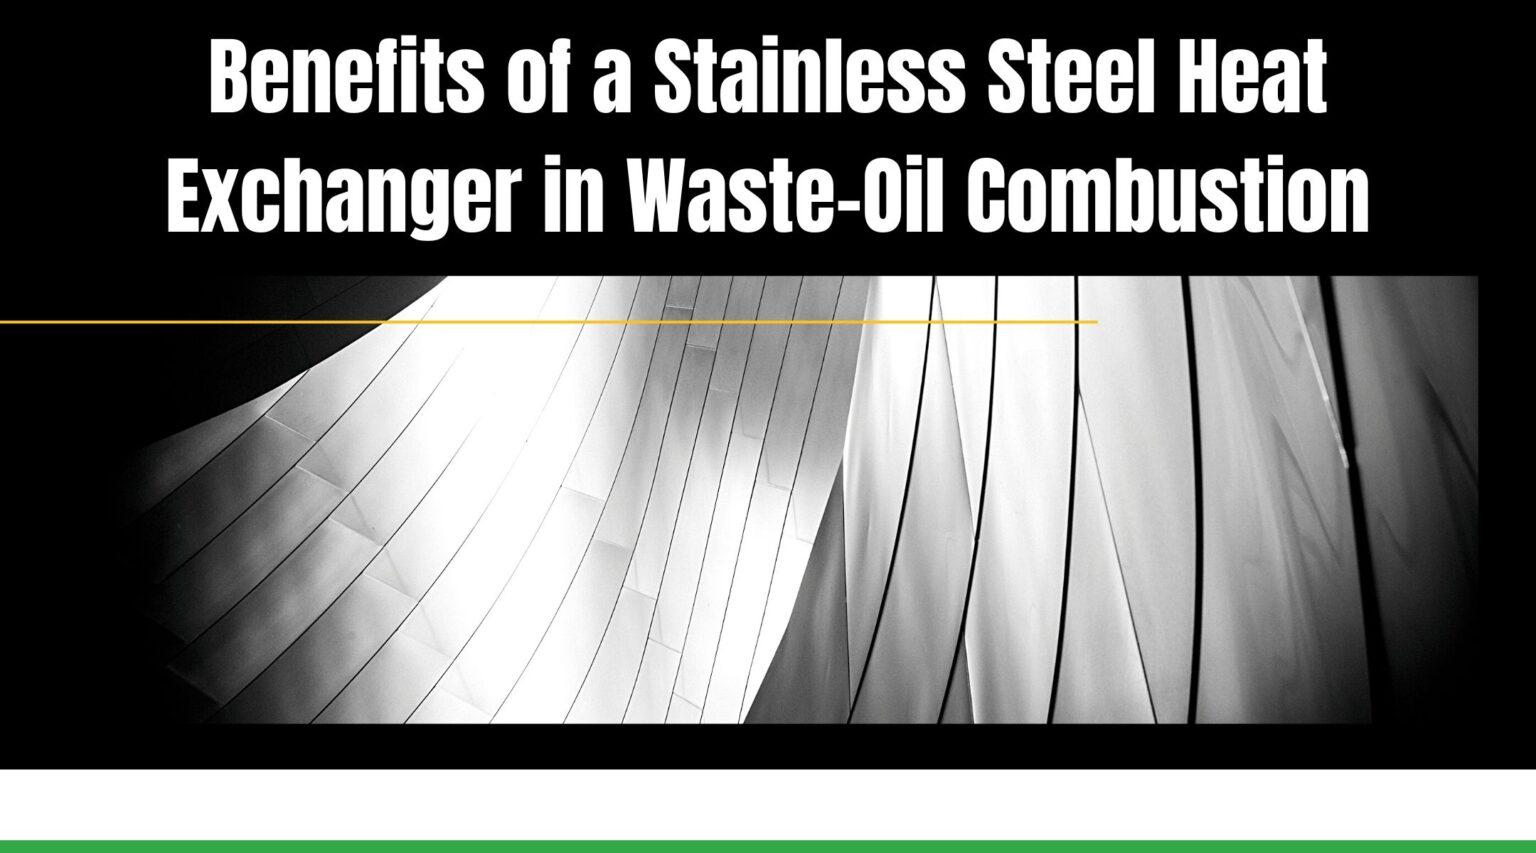 Benefits of a Stainless Steel Heat Exchanger in Waste-Oil Combustion